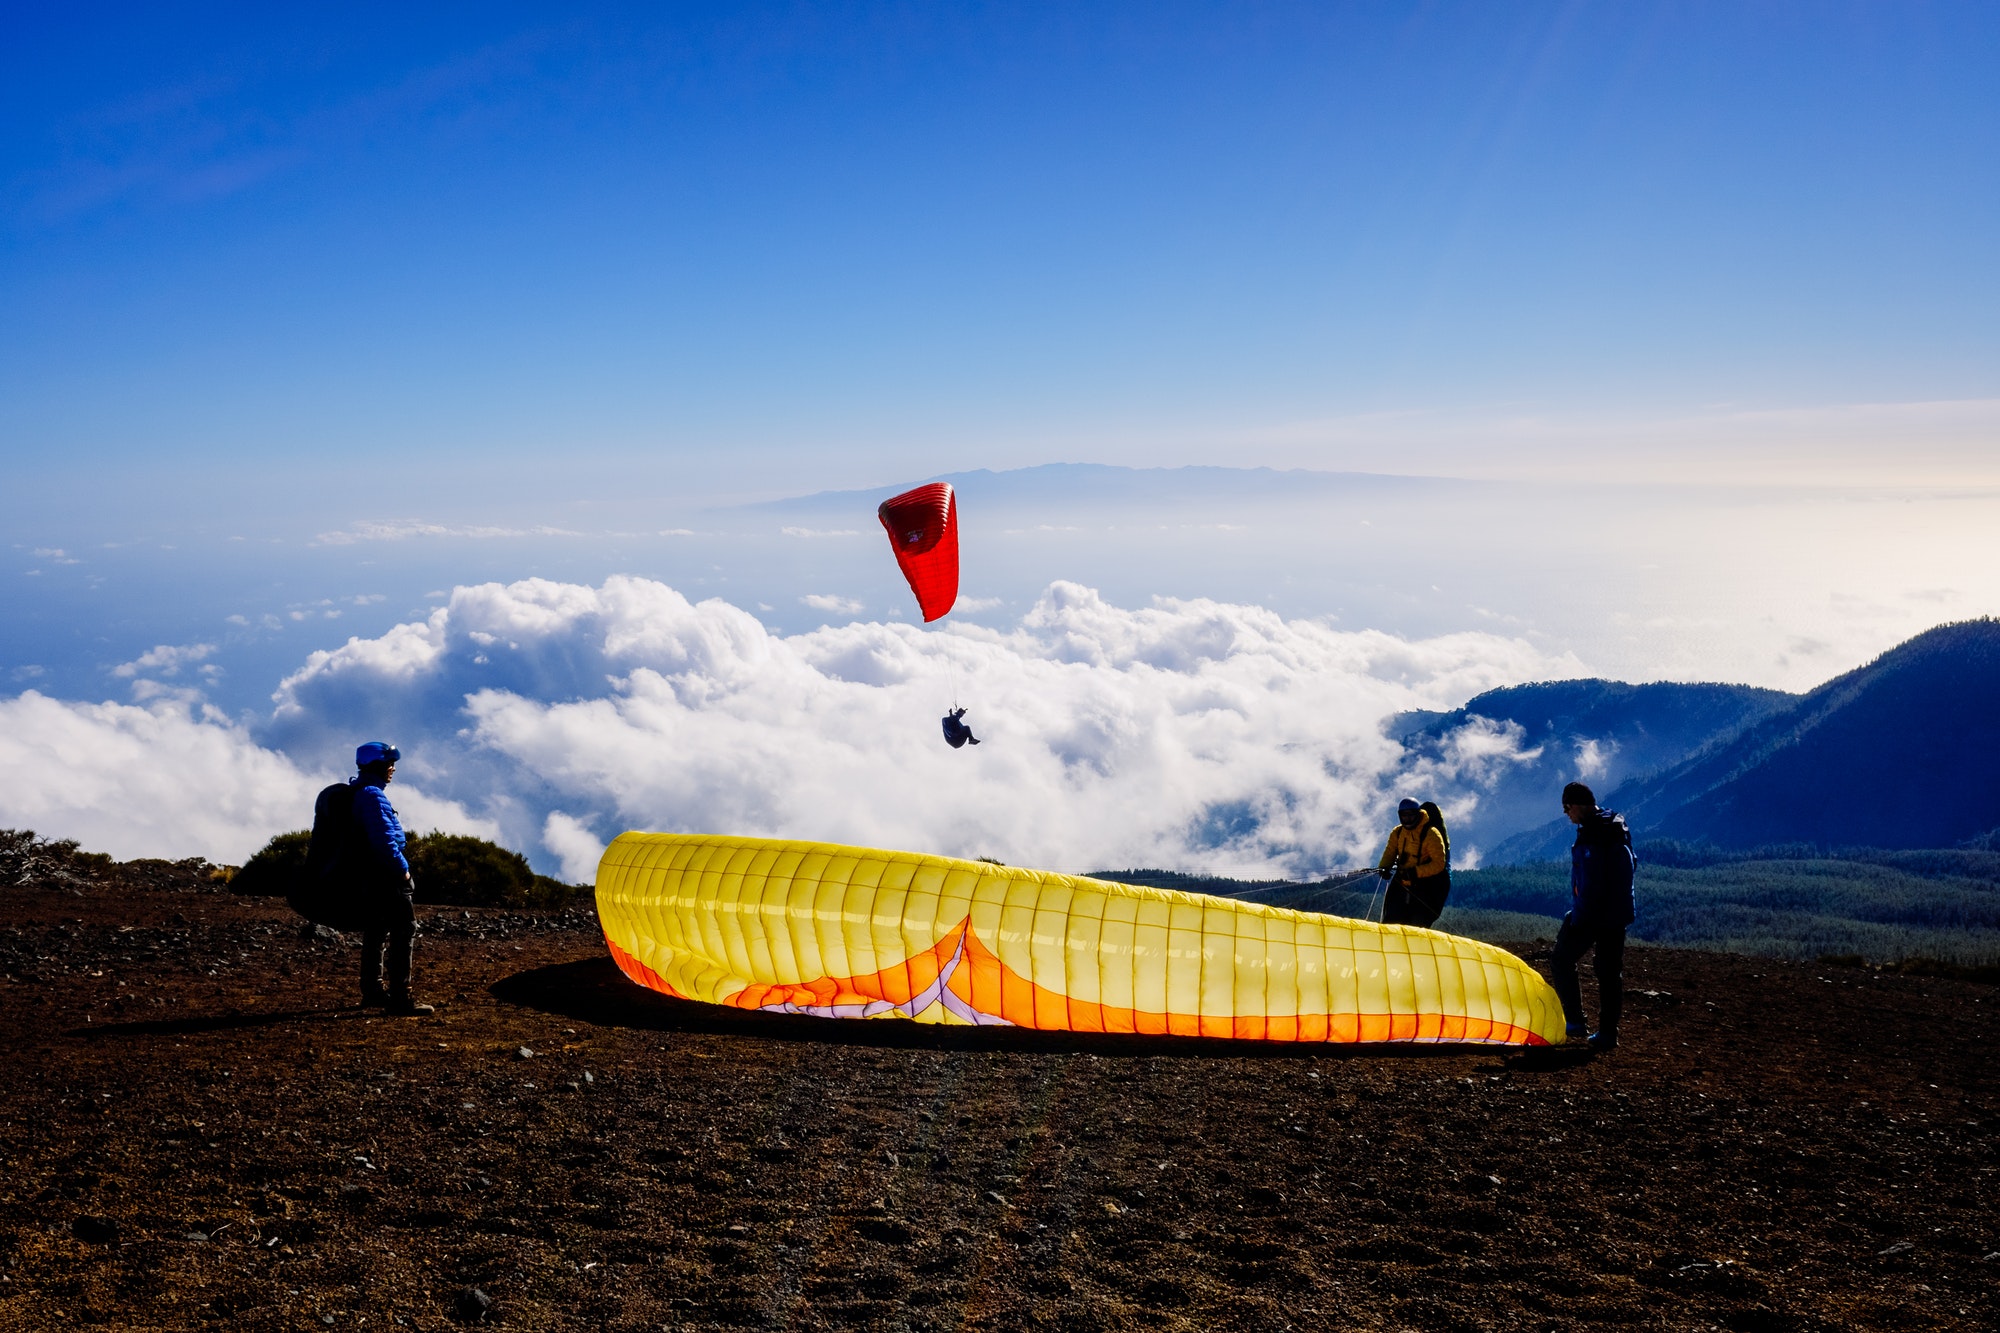 skydiving-experts-and-monitors-prepare-the-sail-of-a-paraglider-to-fly.jpg